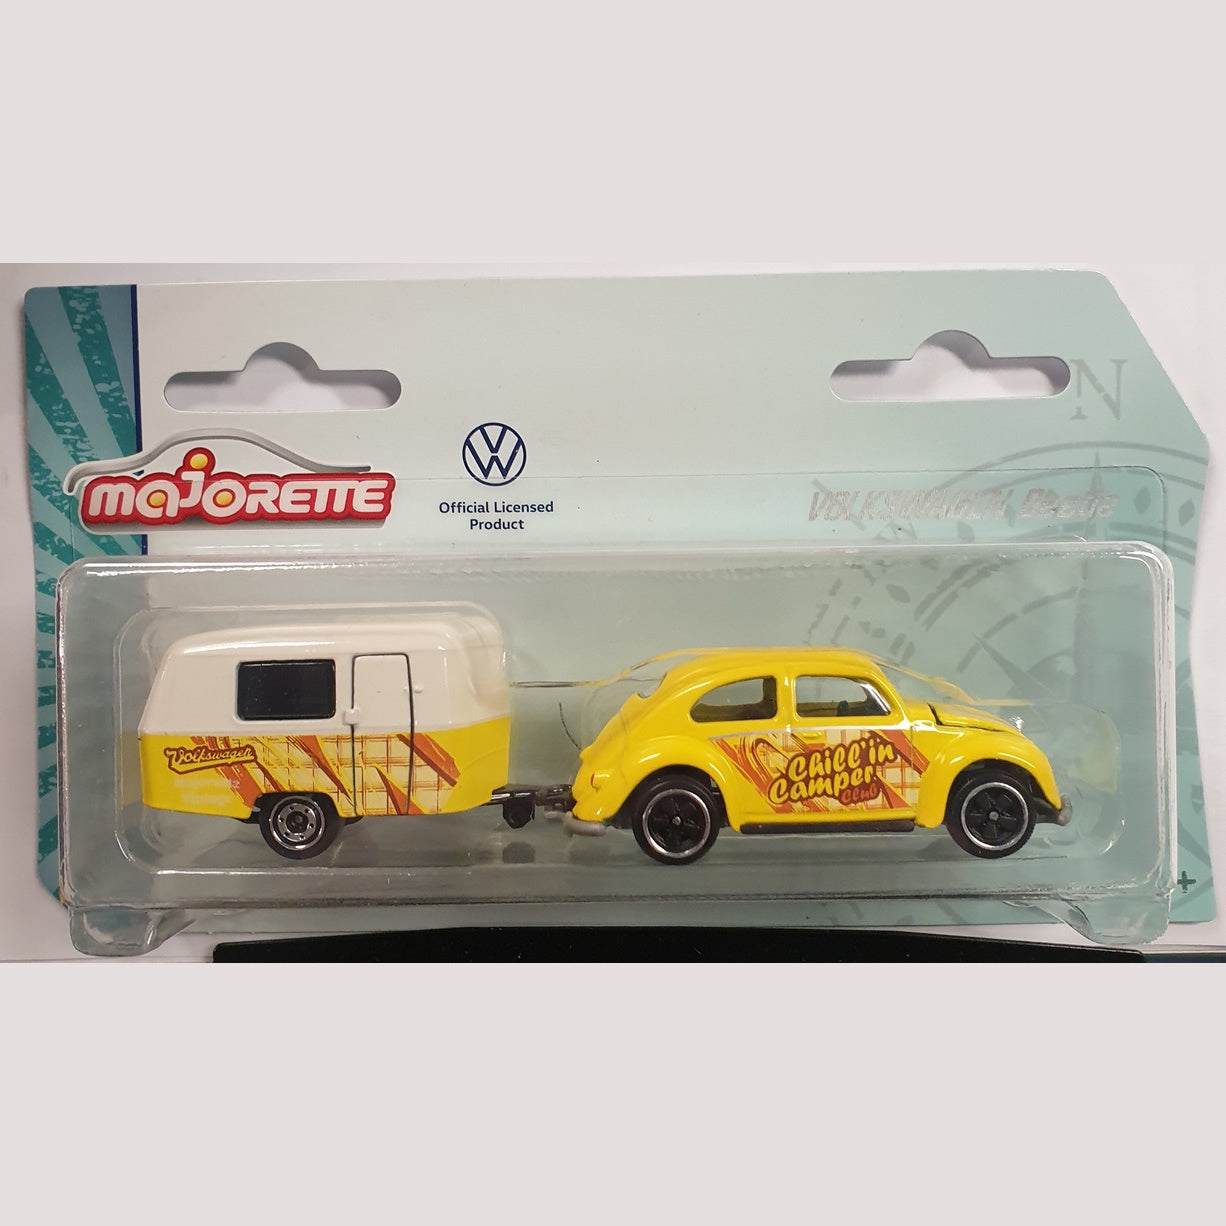 Majorette - Volkswagen Car and Trailer - VW Beetle 'Chill'in' with Van - 1:64 Scale